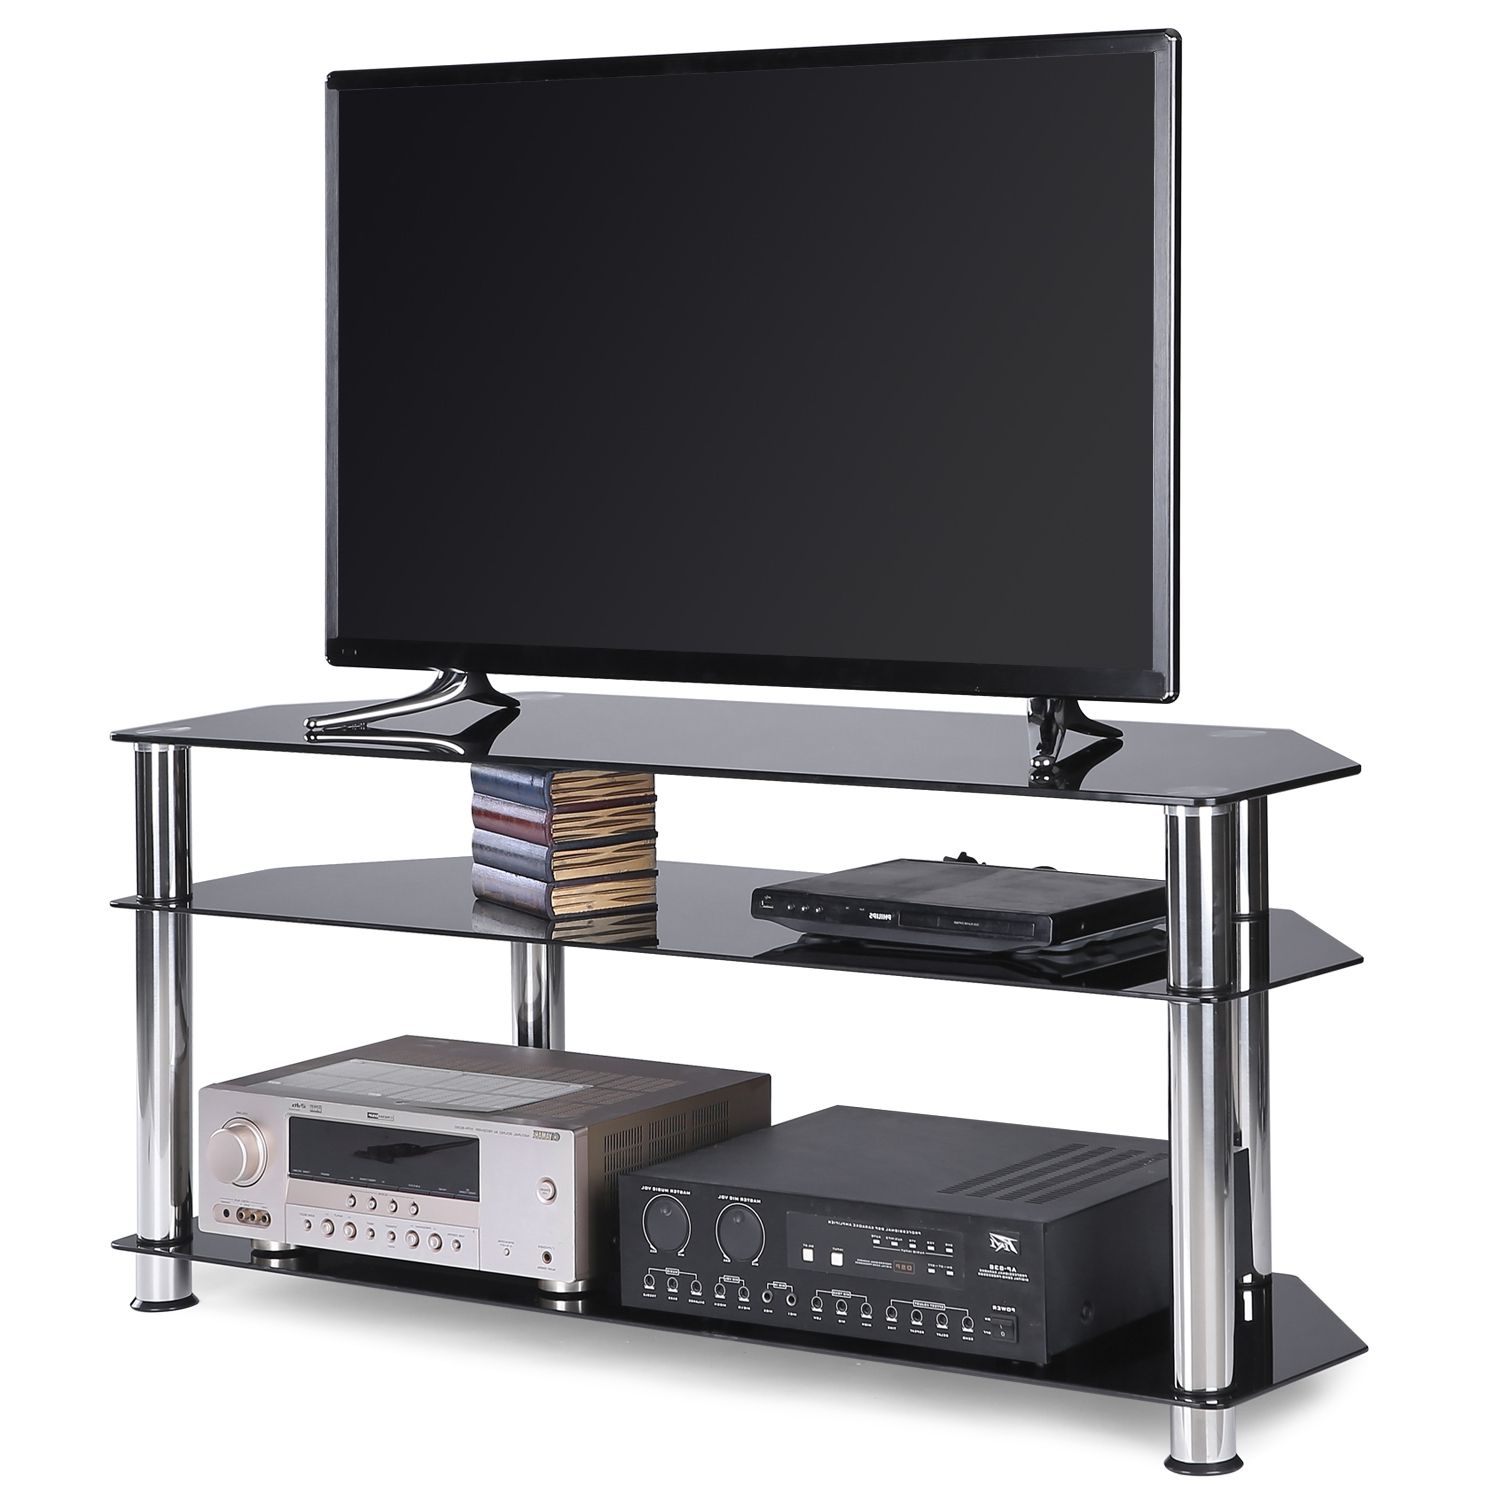 Contemporary Black Corner Glass Tv Stand For Tvs Up To 55 With Regard To Sahika Tv Stands For Tvs Up To 55" (Gallery 5 of 20)